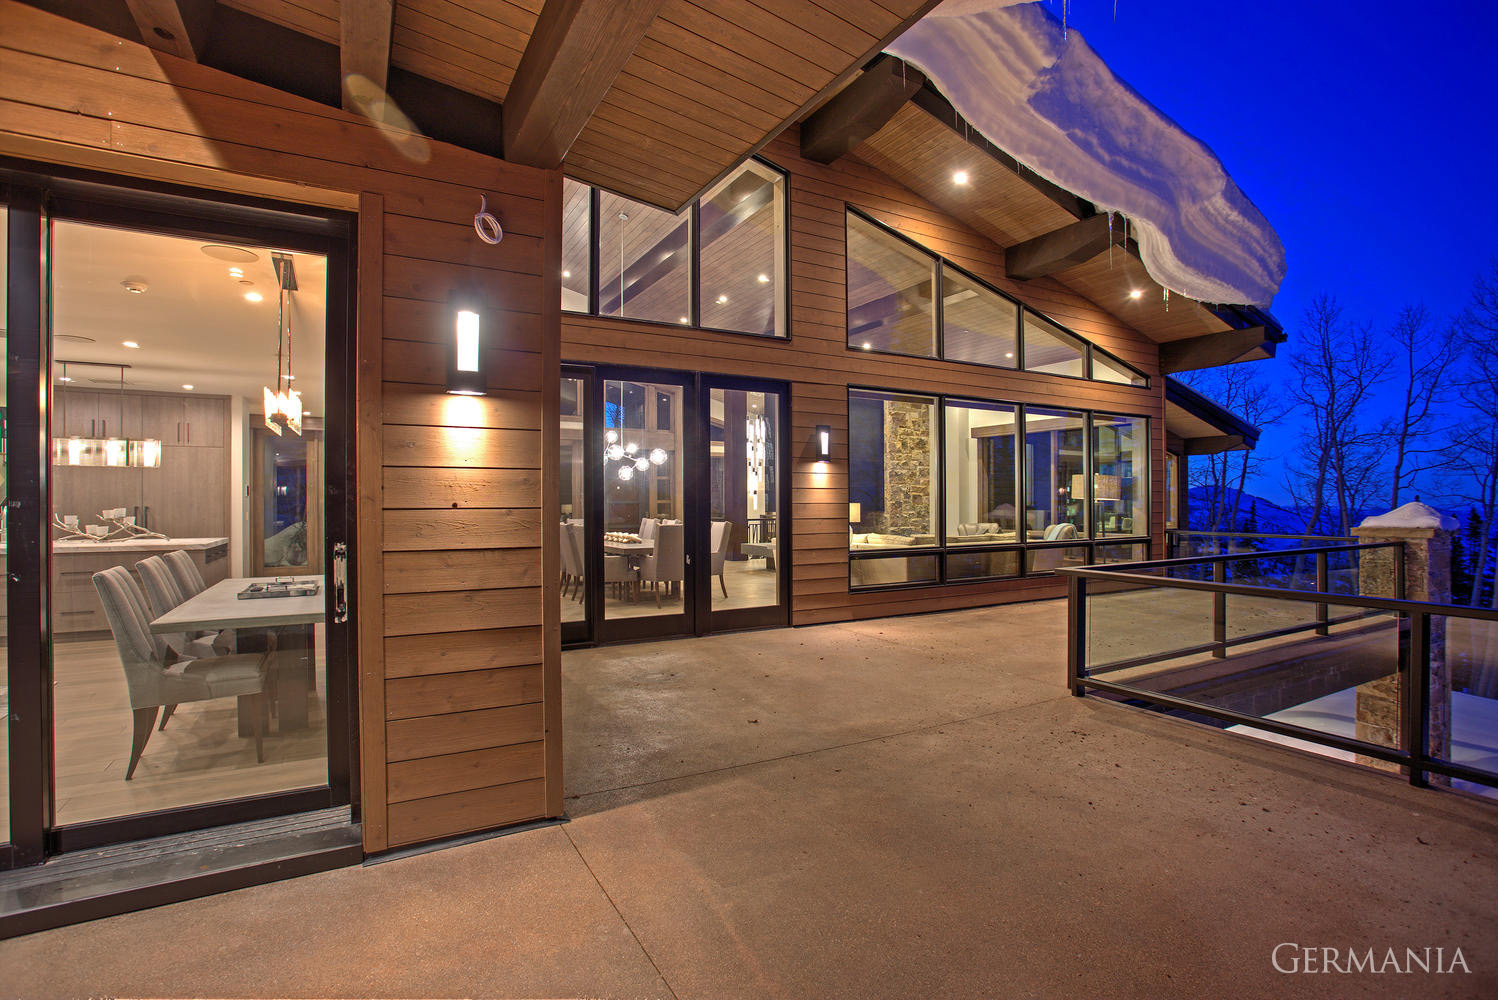 Thinking about creating your dream house? Germania Construction has built some of Park City's finest custom luxury homes.